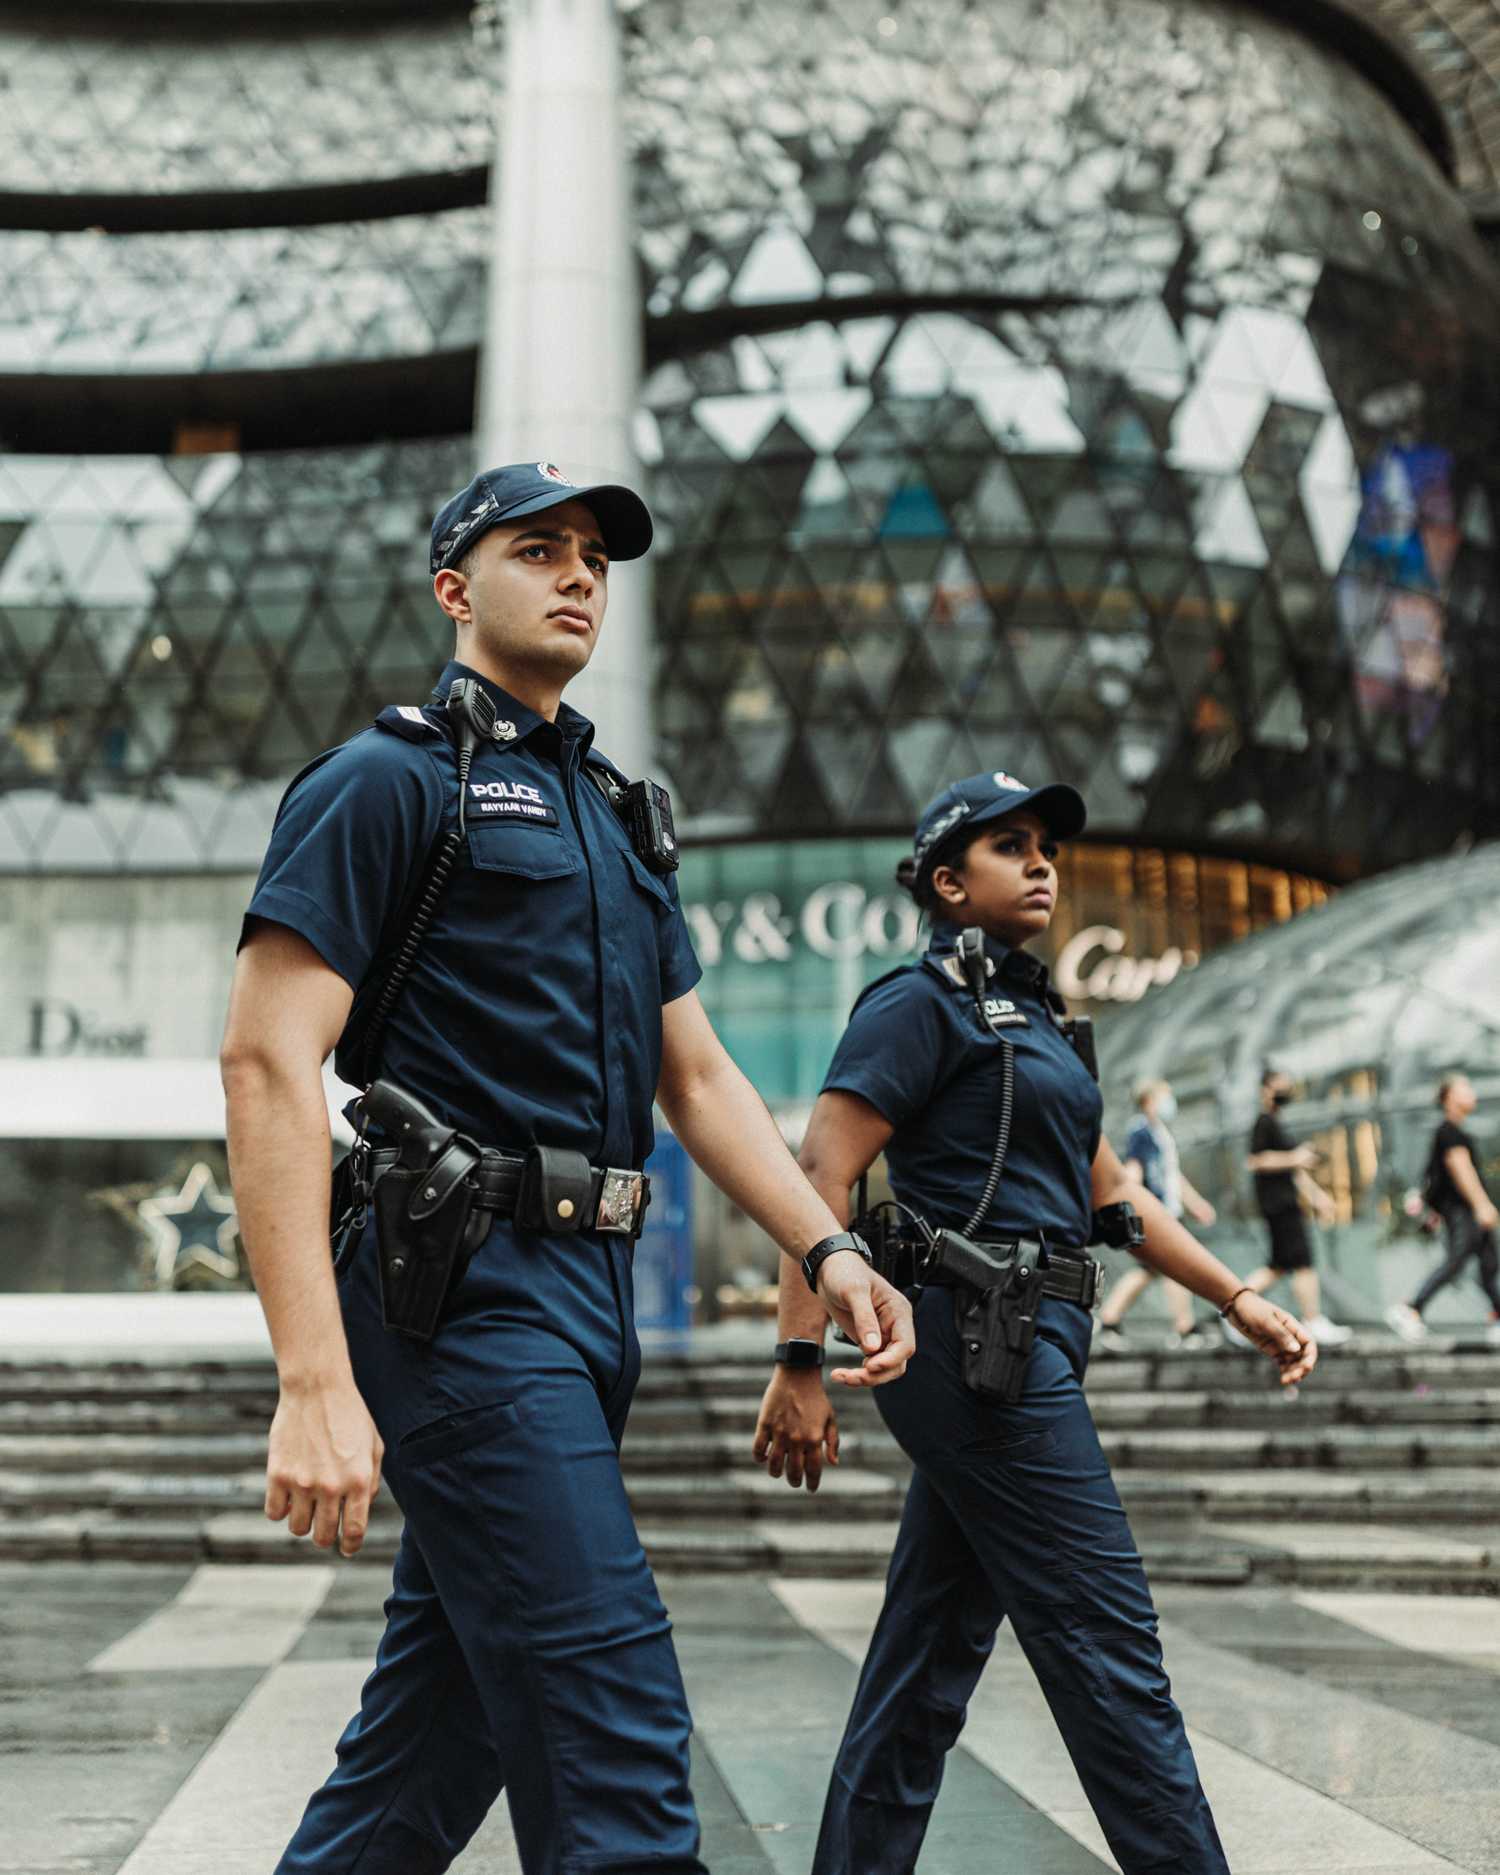 Photo of two Ground Response Force officers walking in Orchard Road, with ION Orchard building in background